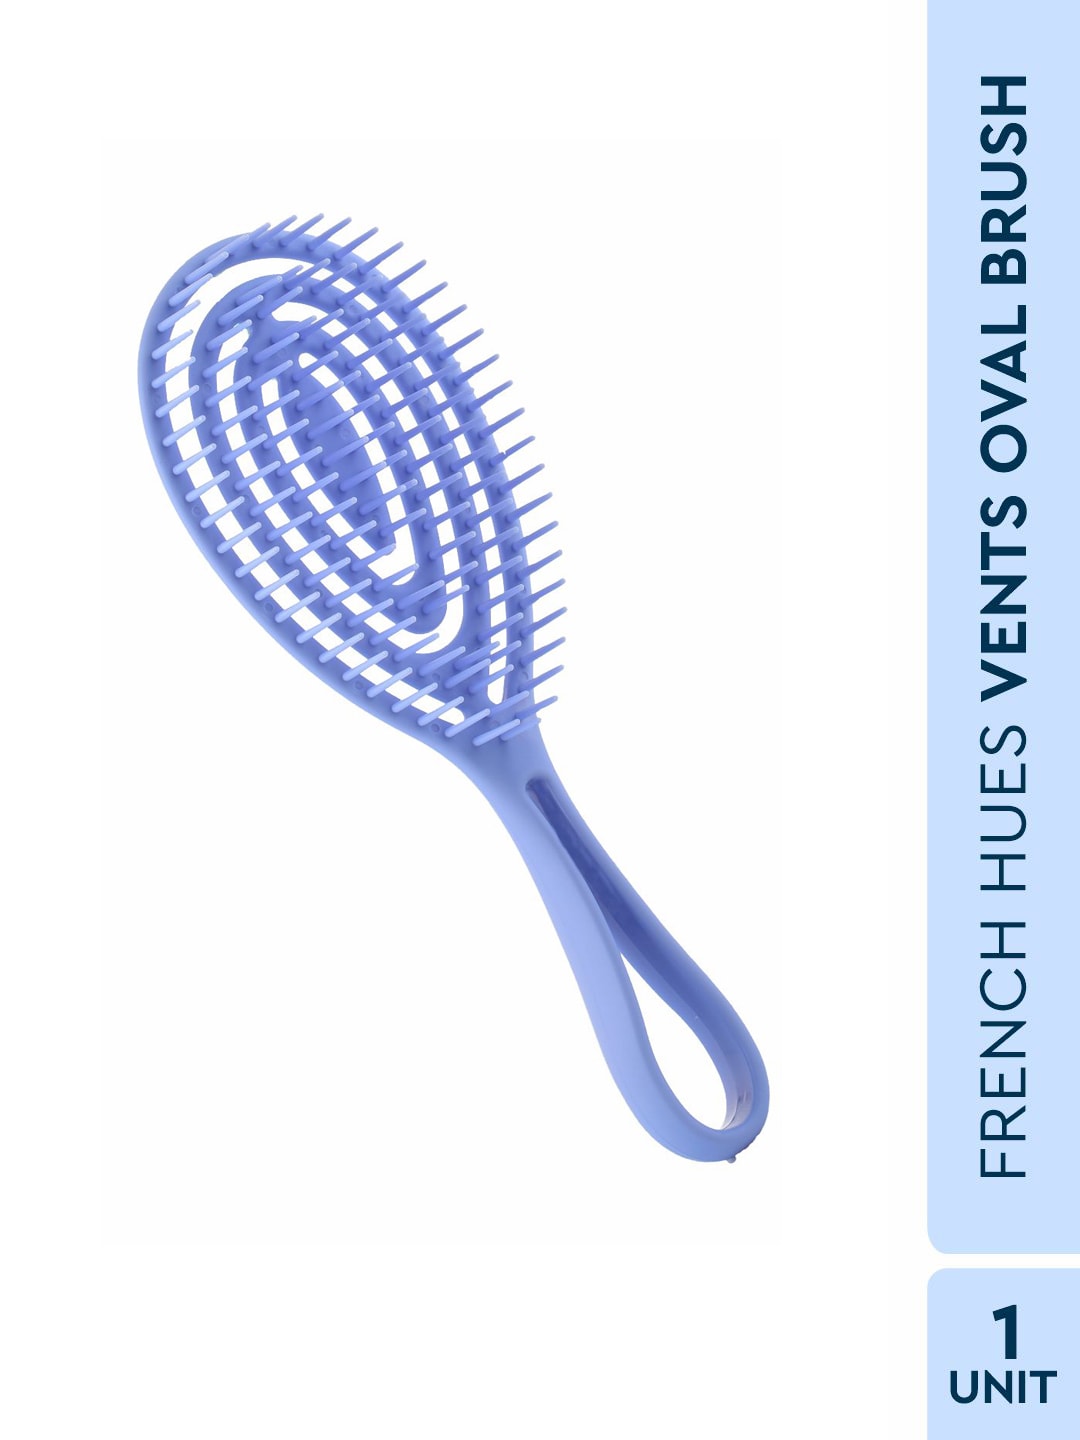 UBB Vents G Oval Hair Brush GB-LH008 (French Hues) Price in India